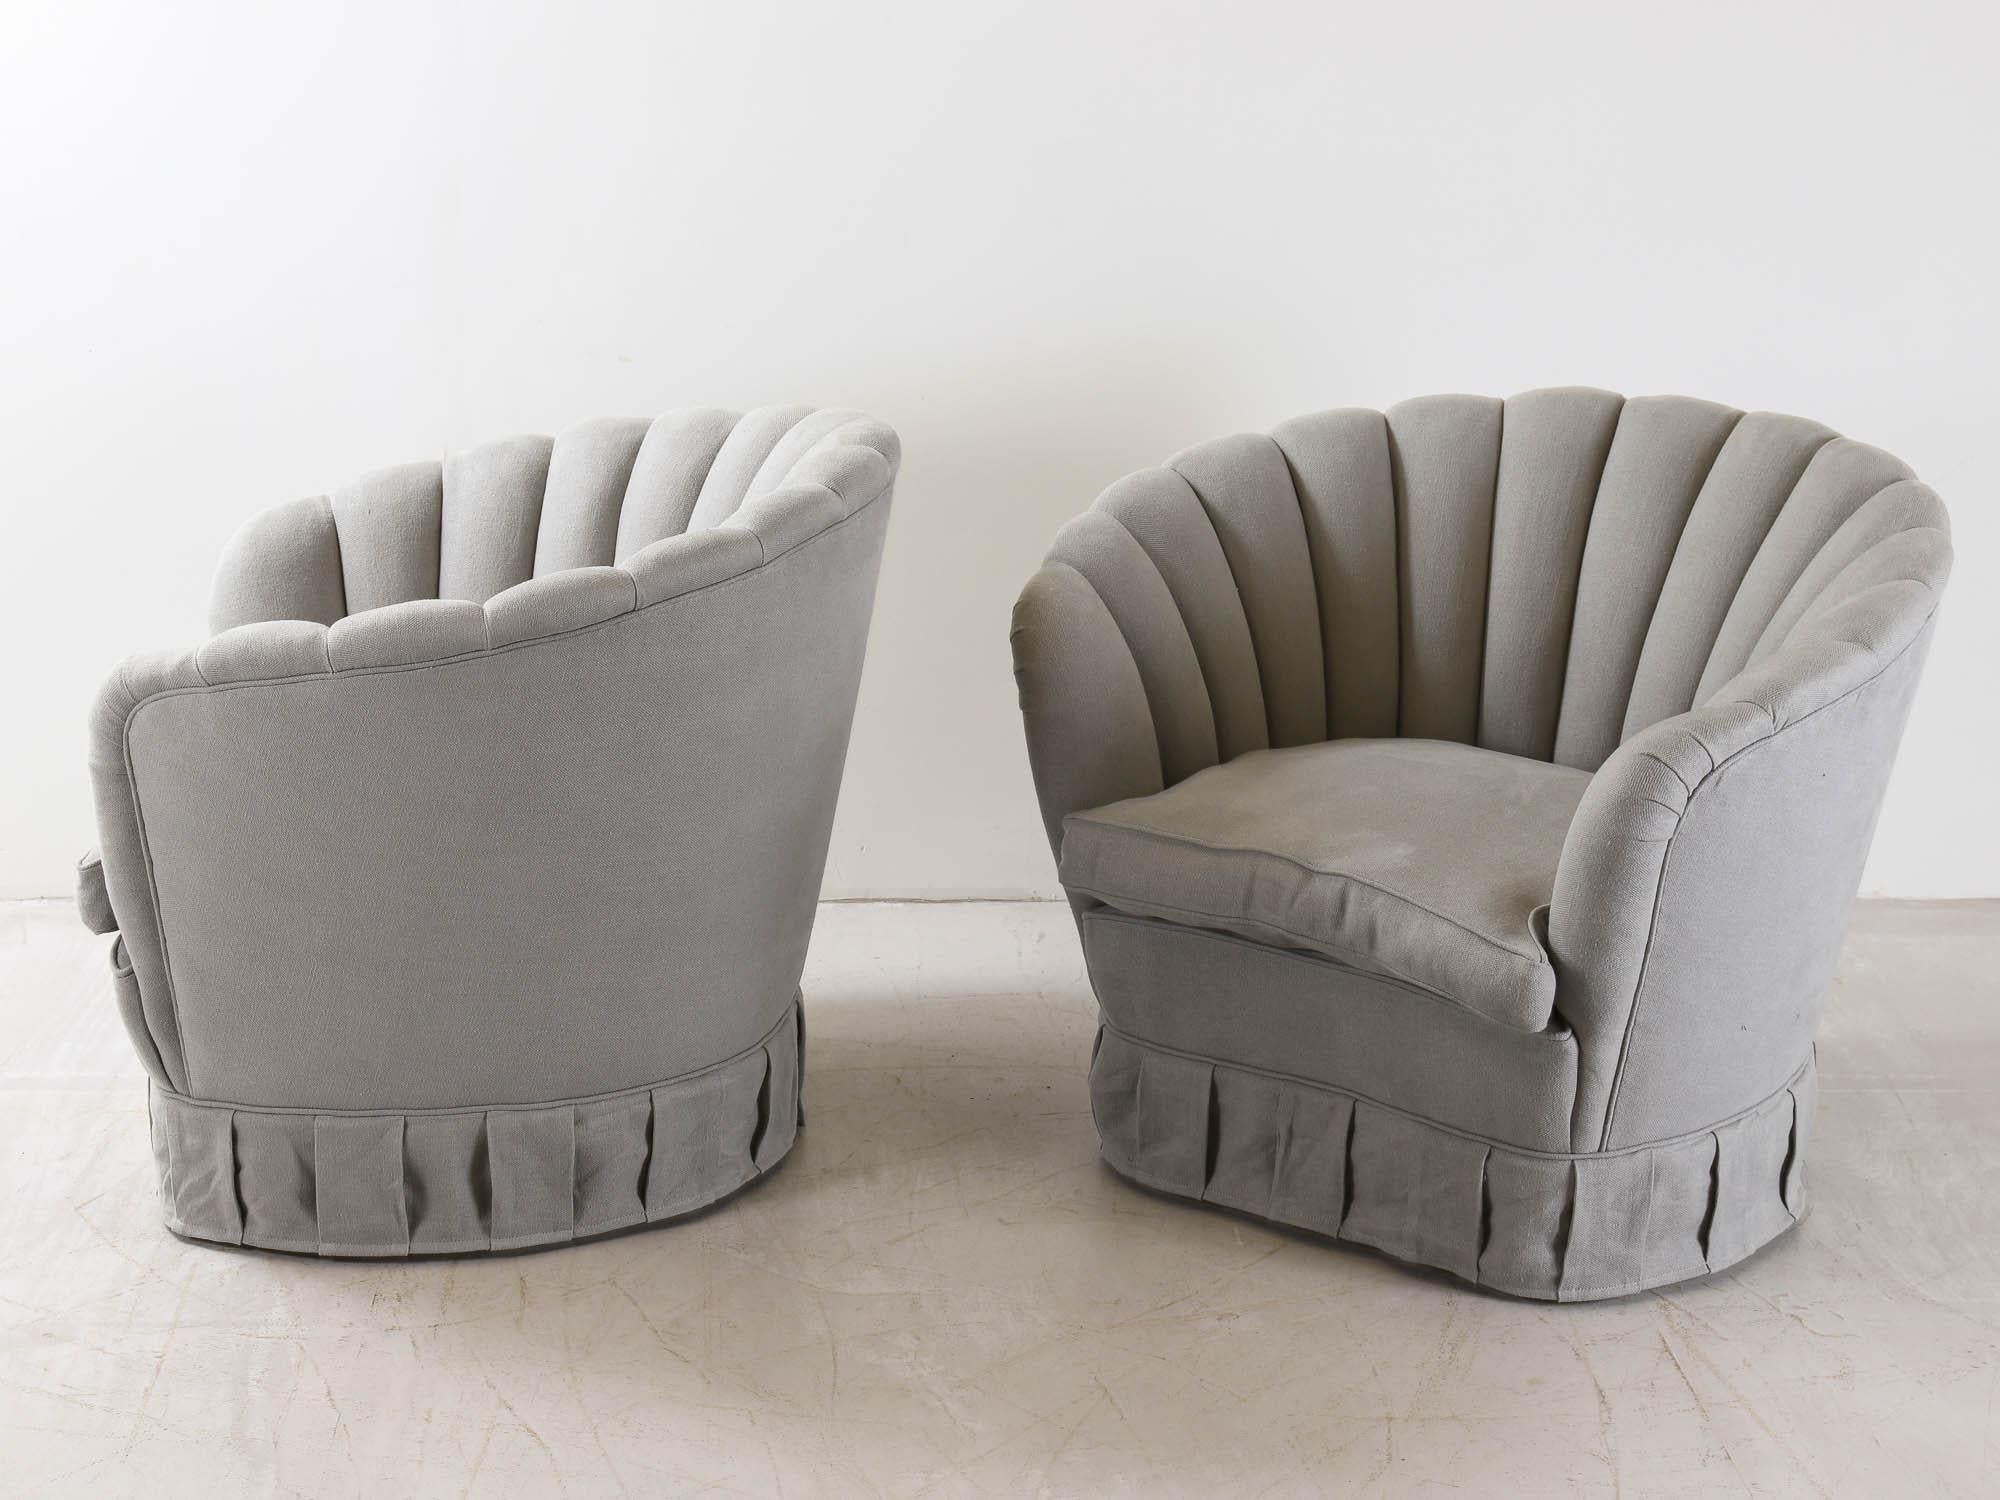 Pair of Gio Ponti Chairs In Good Condition For Sale In London, Charterhouse Square